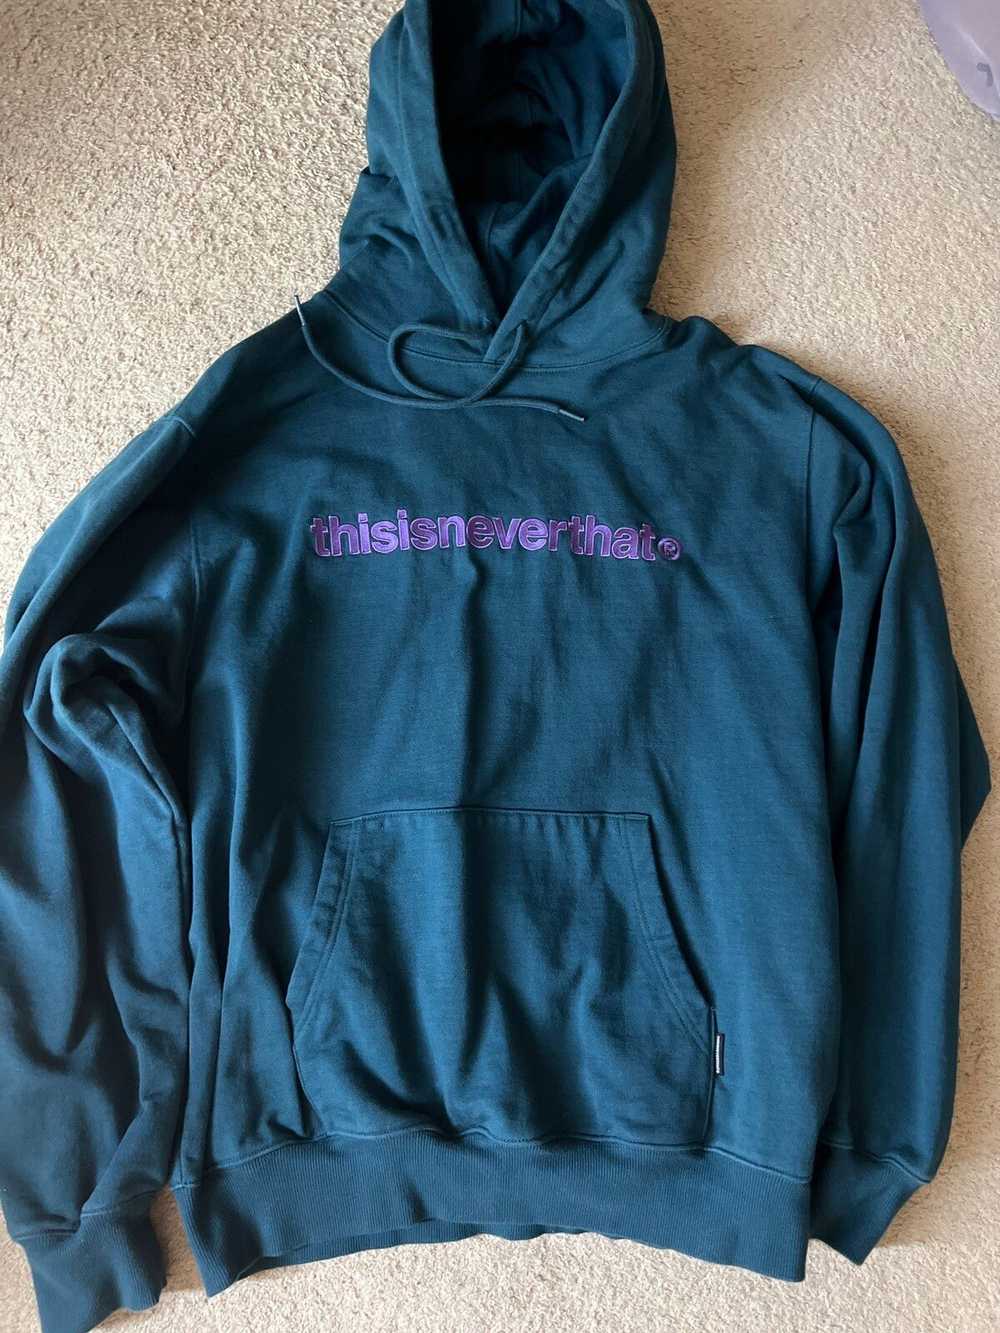 Thisisneverthat Thisisneverthat teal hoodie - image 1